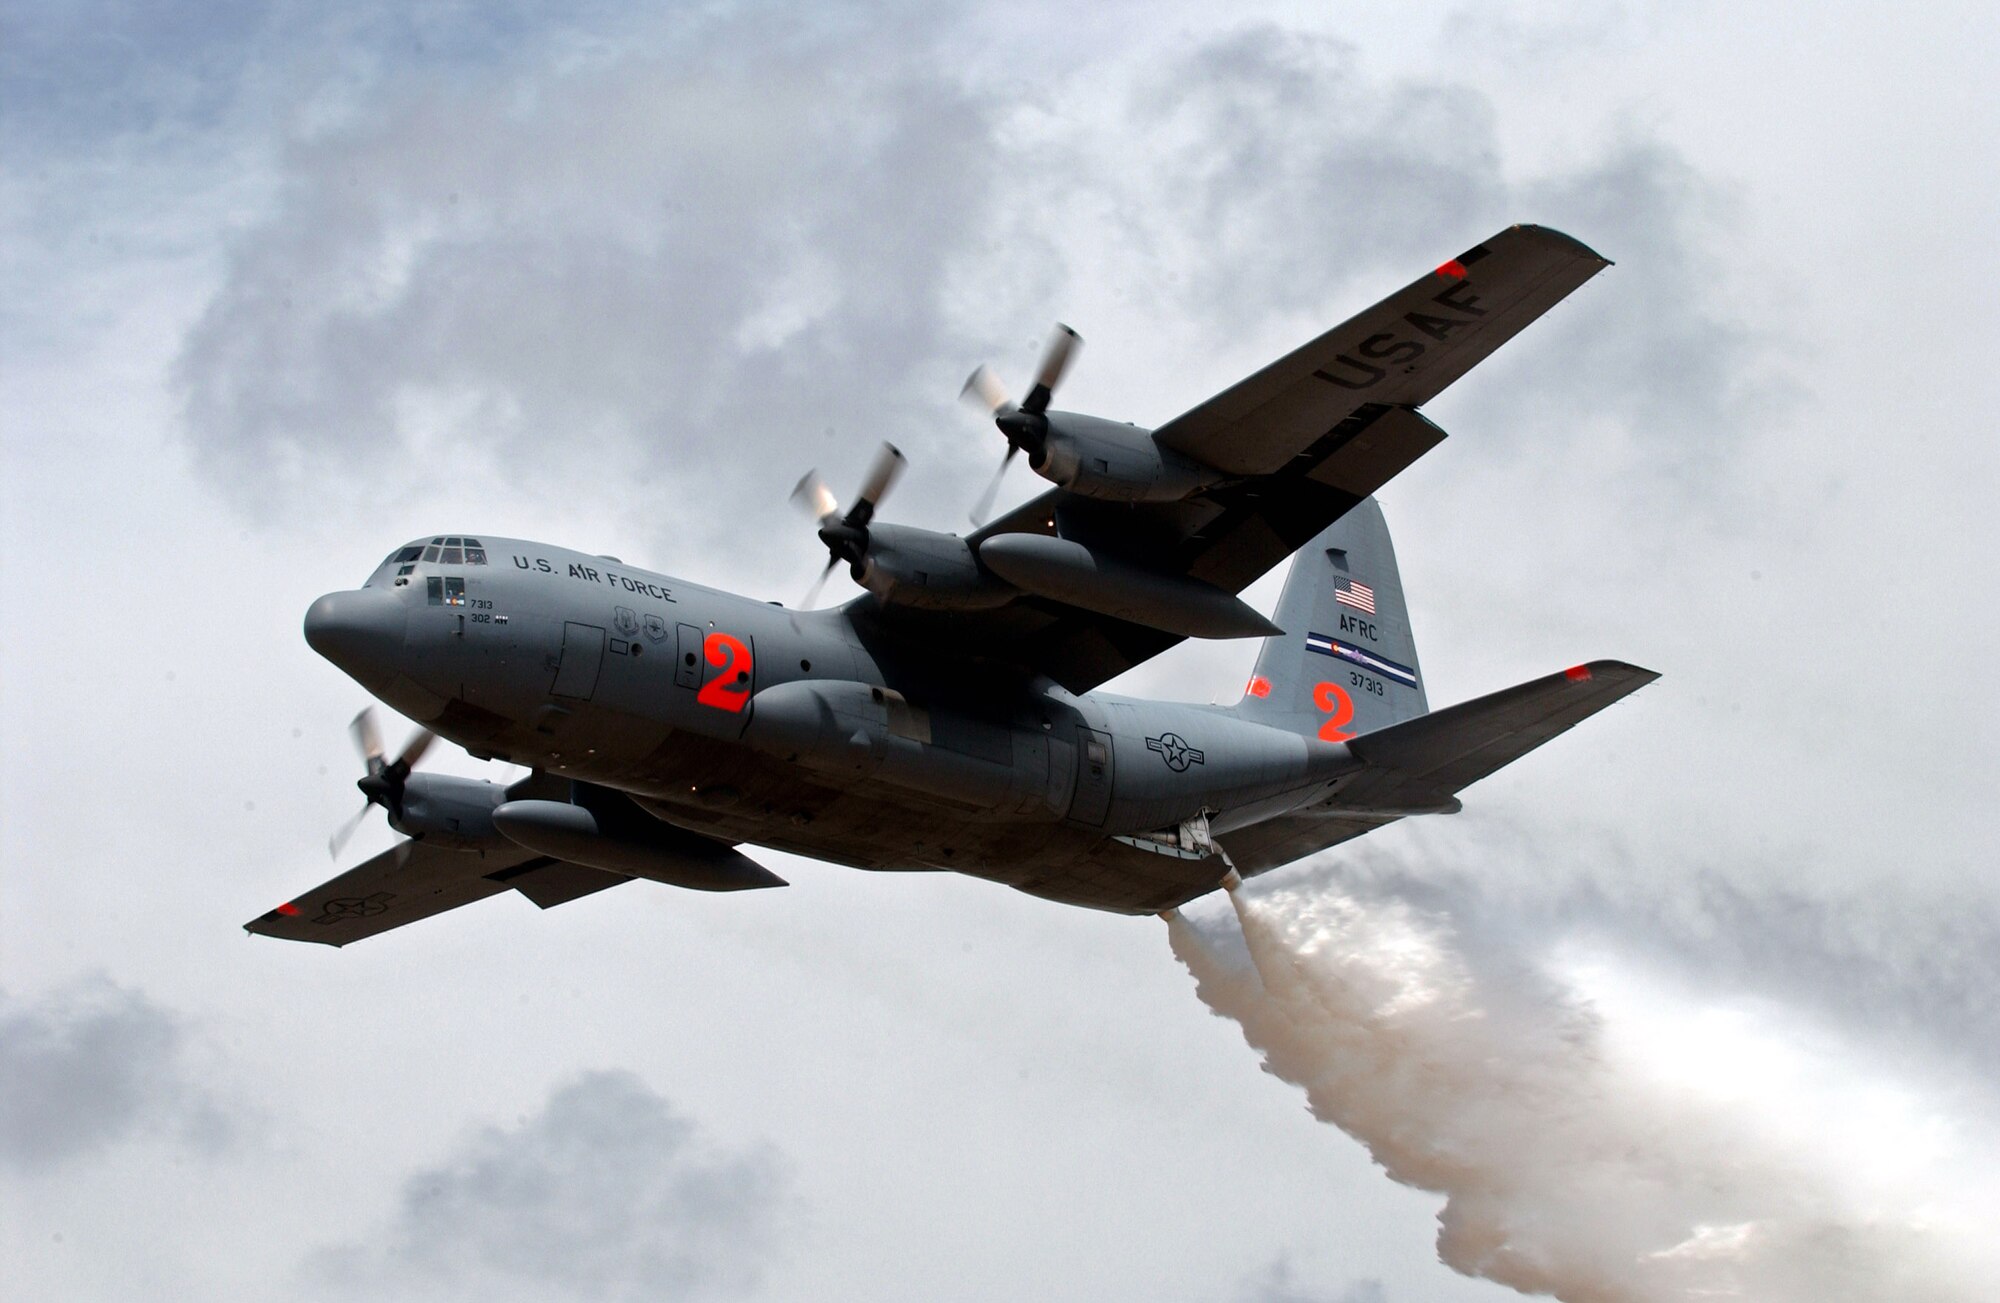 The Air Force has four wings flying C-130 Hercules aircraft that can be equipped with Modular Airborne Firefighting Systems like the C-130 shown here.  (U.S Air Force photo/Tech. Sgt. Rick Sforza)